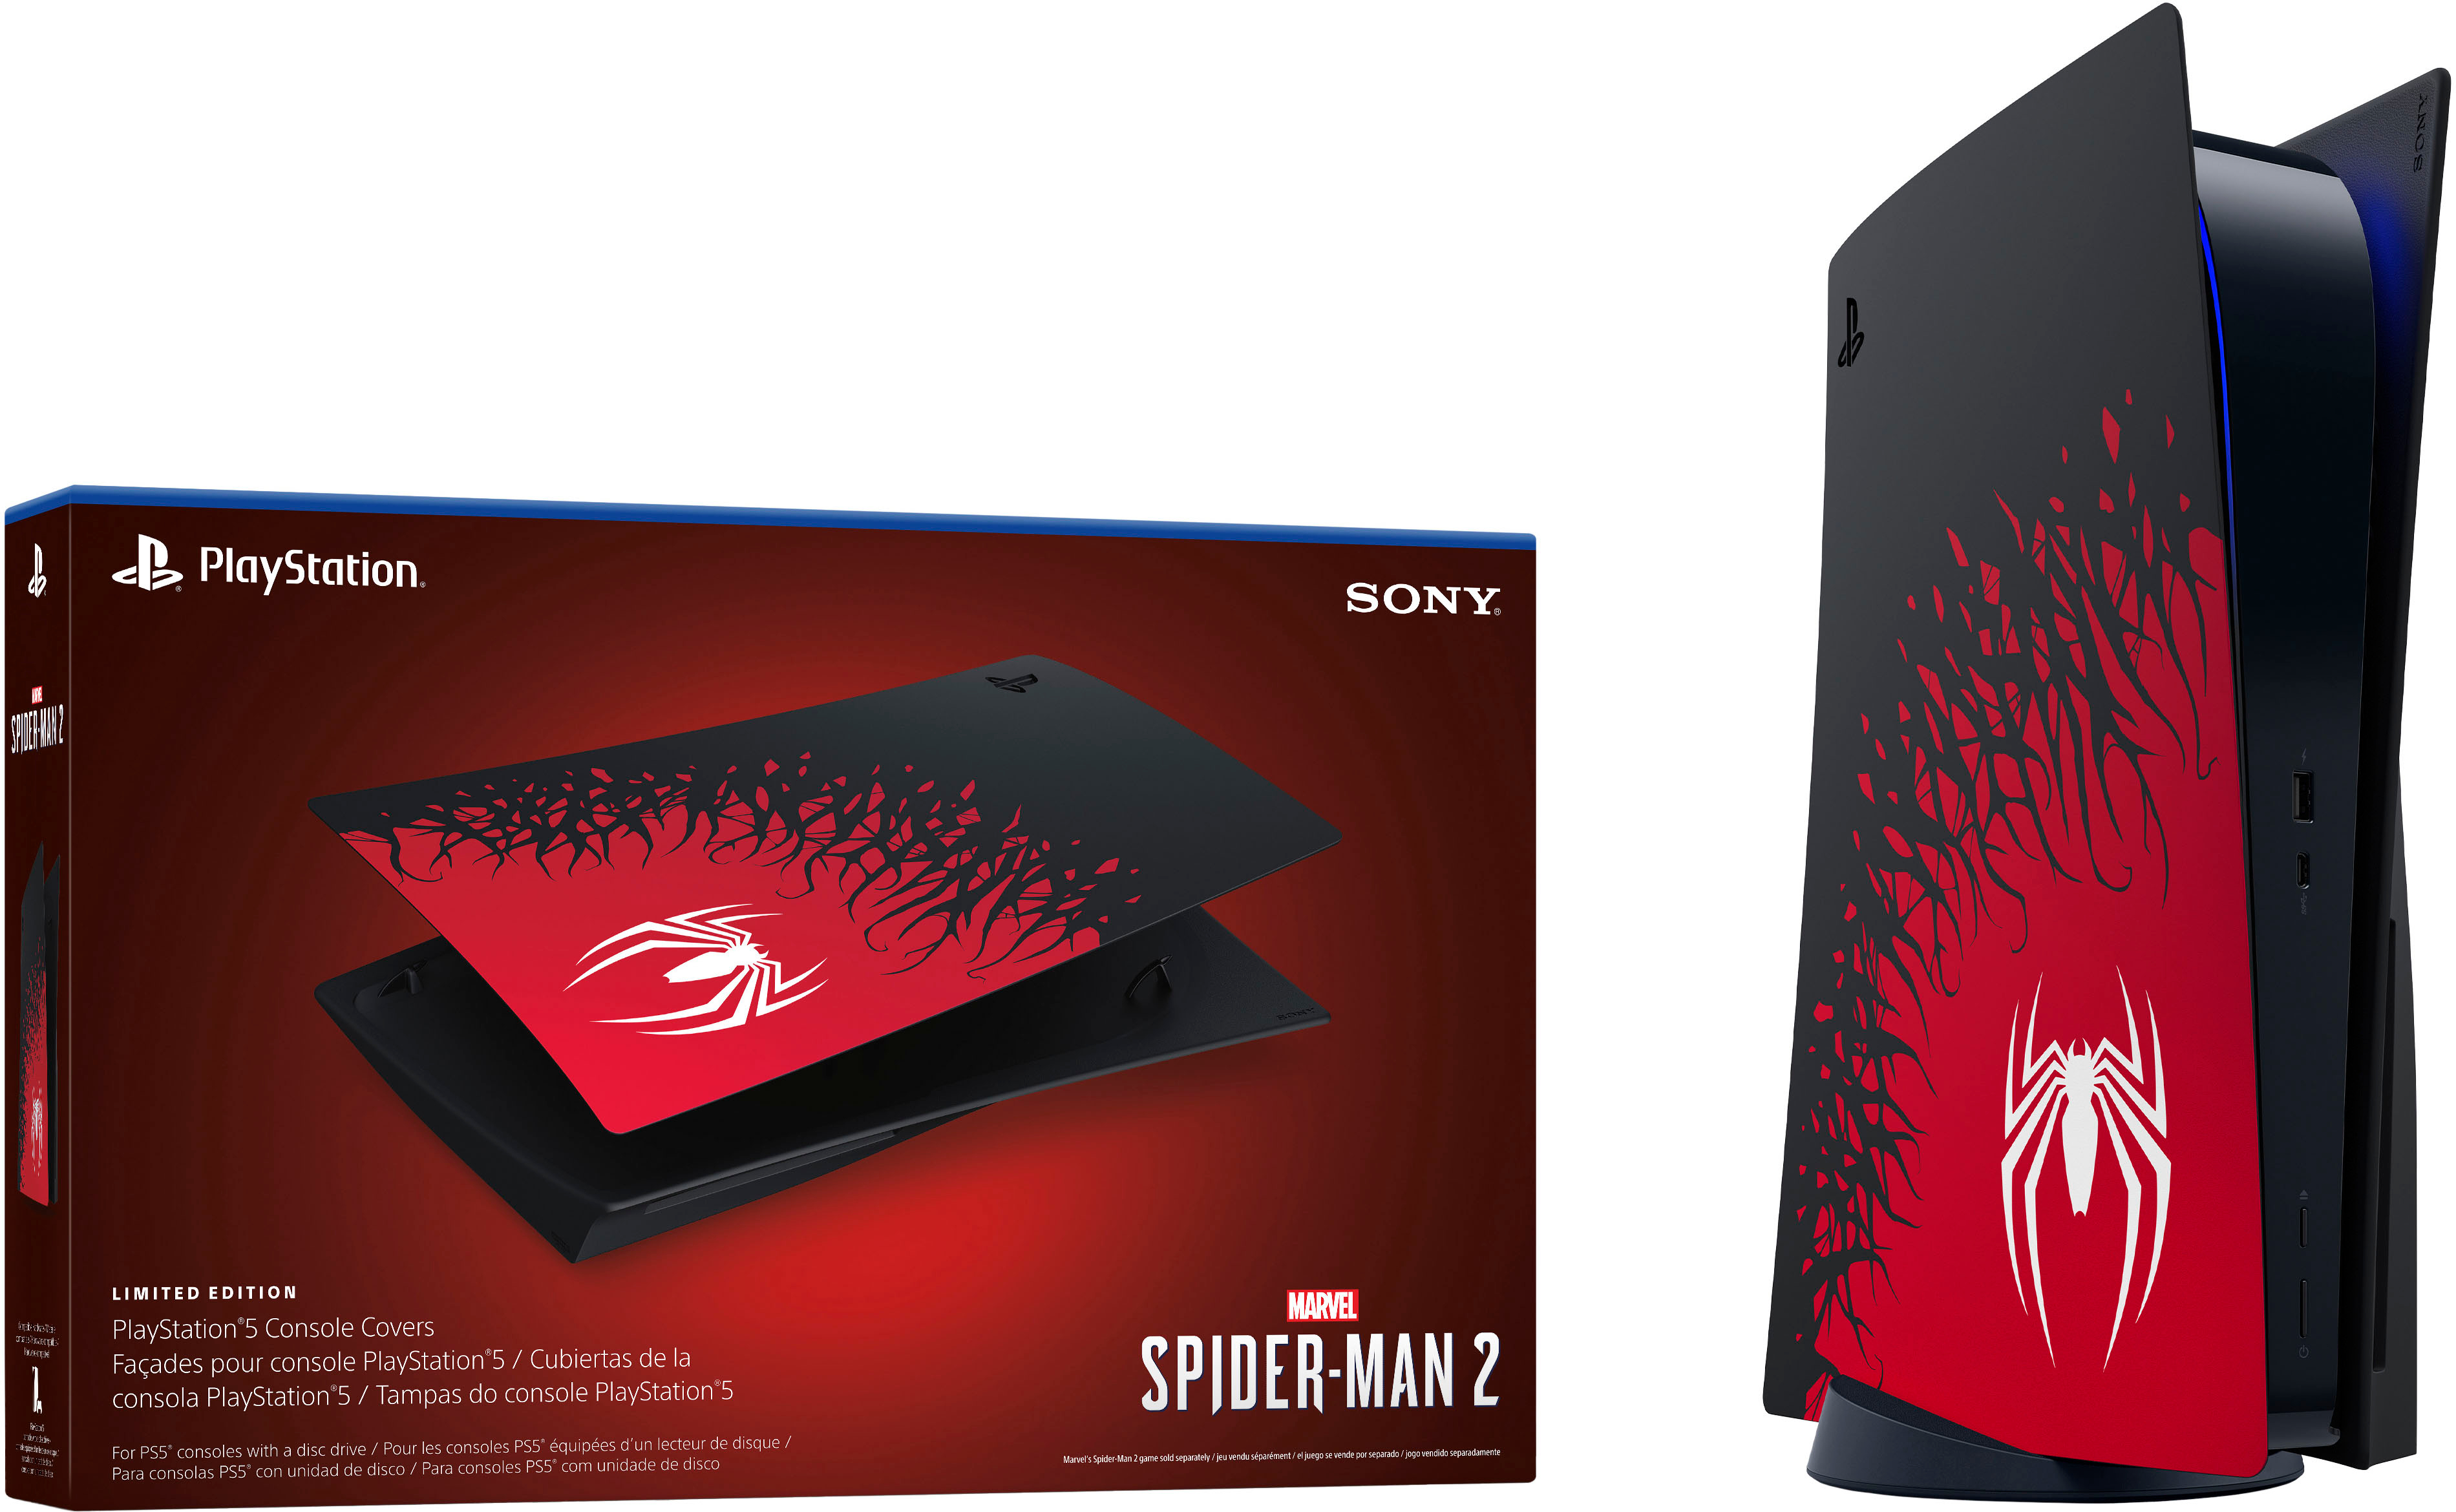 Best Buy: Sony PlayStation 5 Console Covers – Marvel's Spider-Man